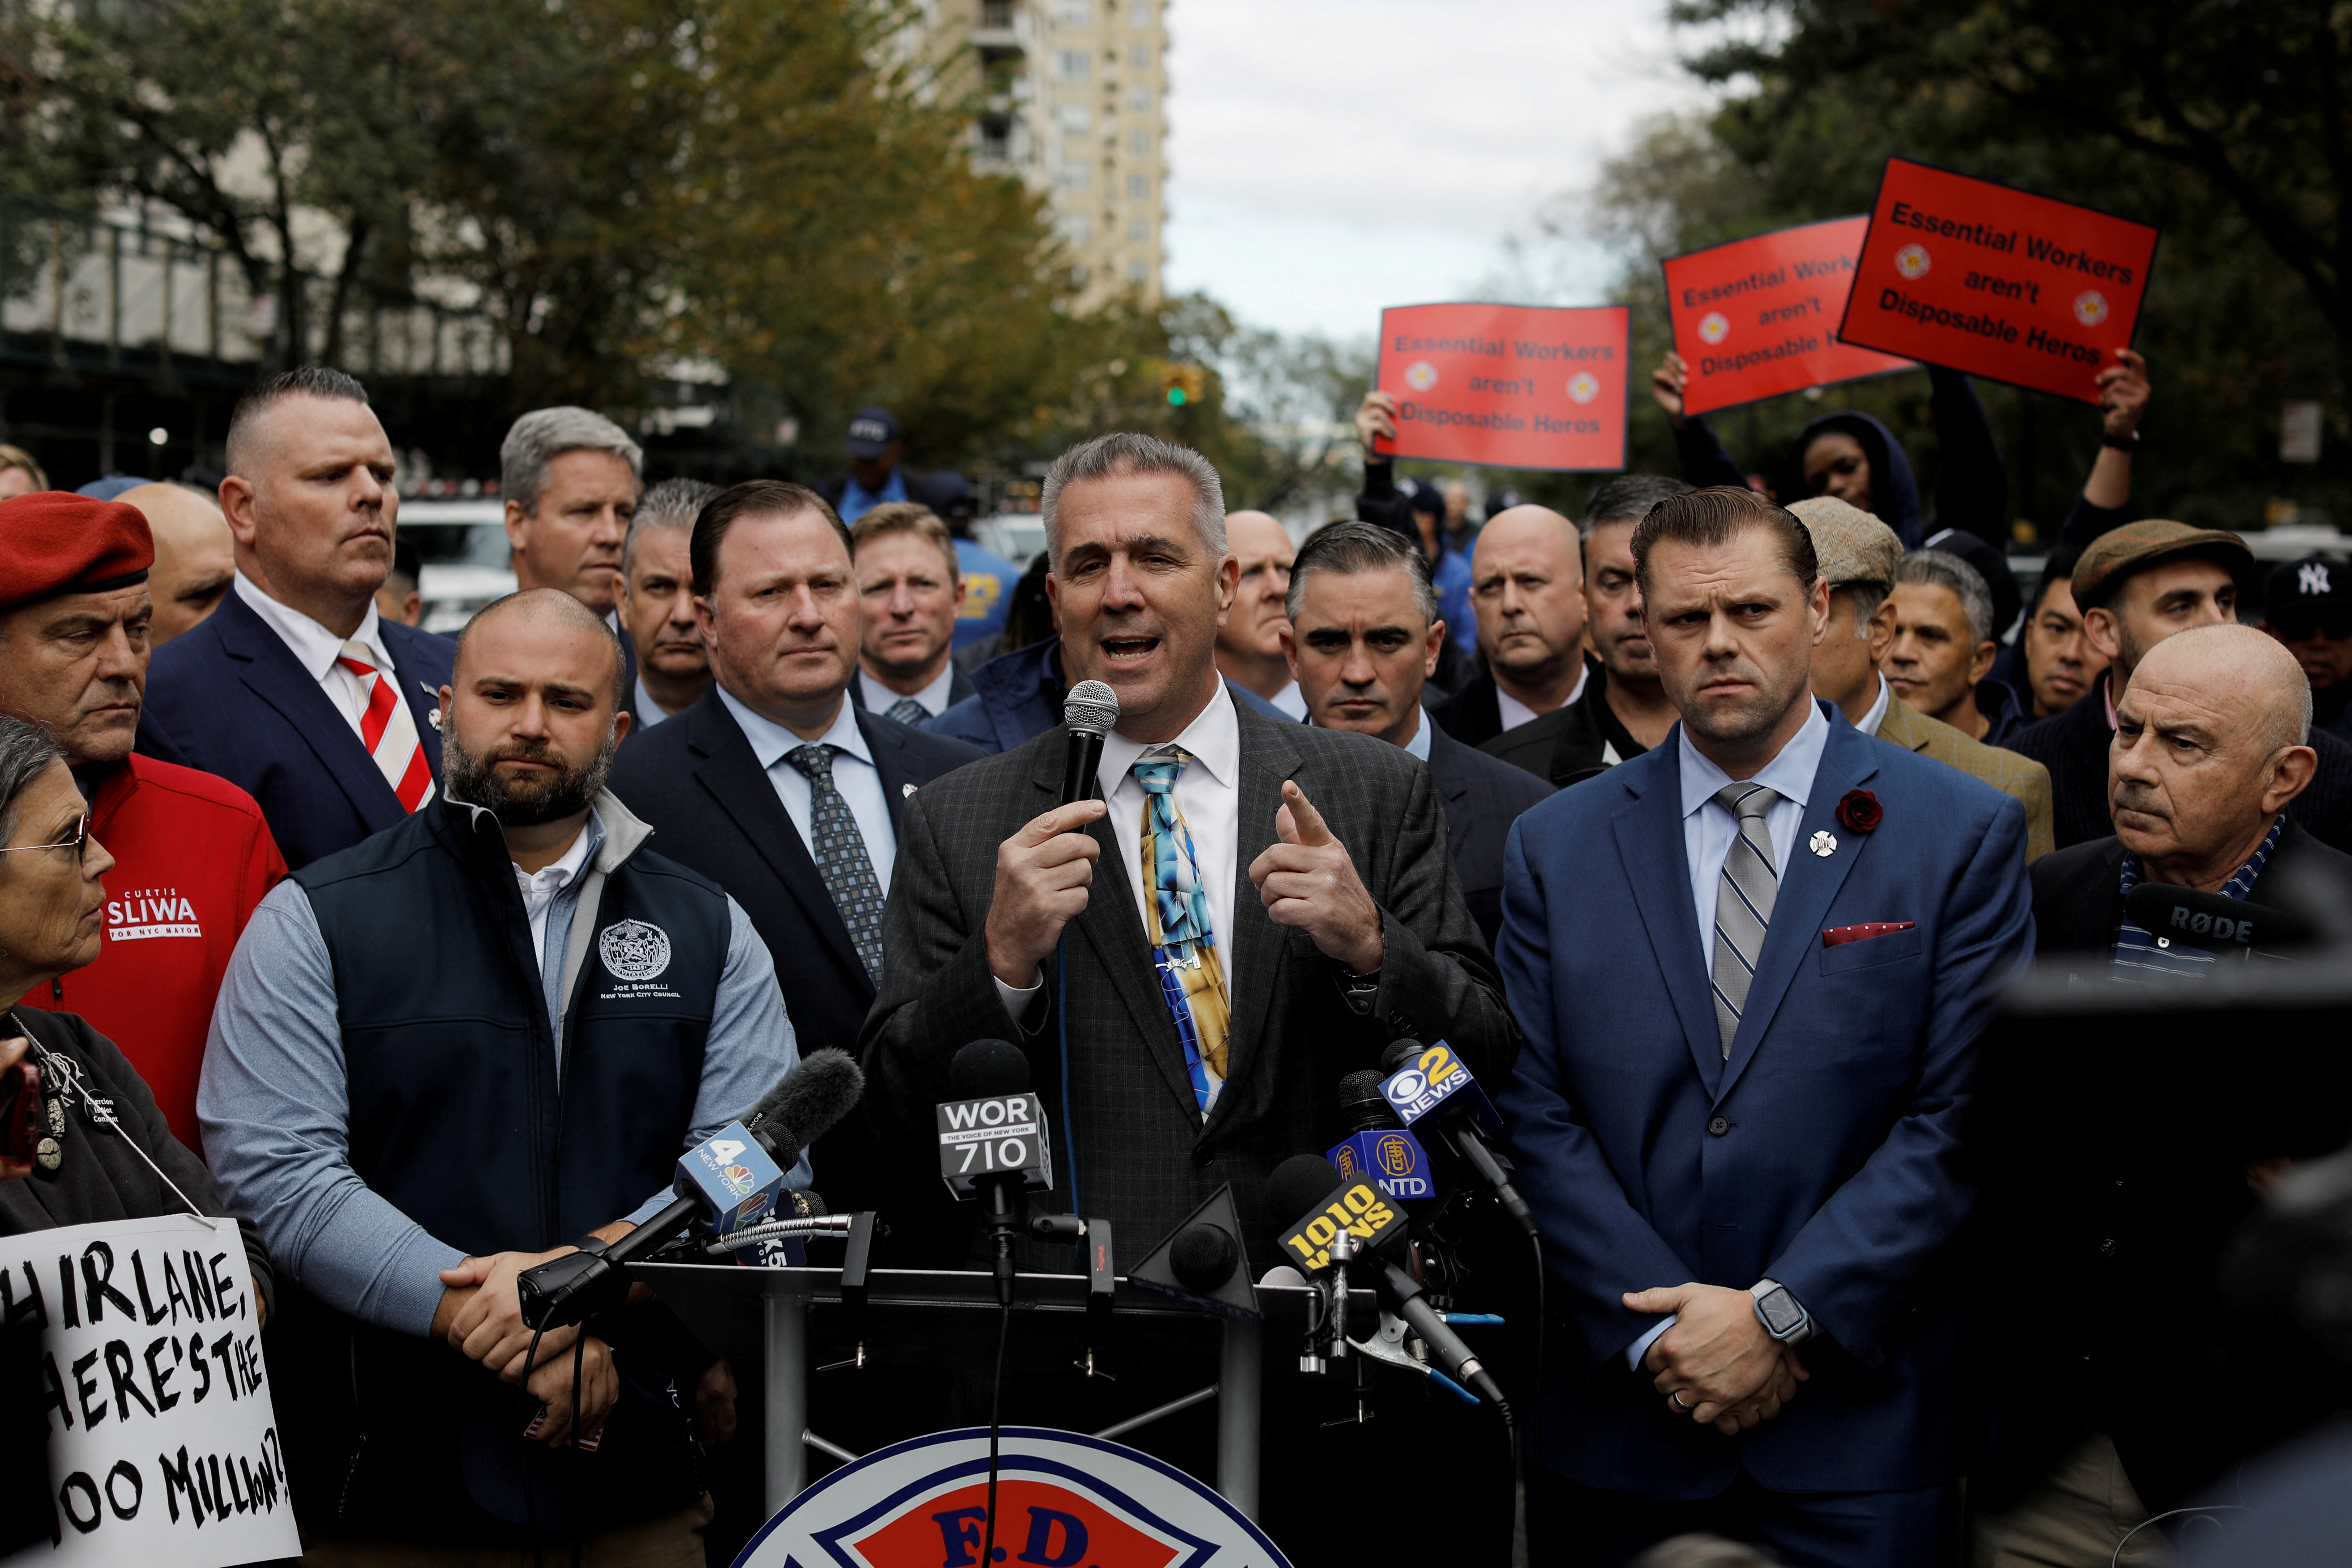 Union firefighters and others protest against mandated vaccines in New York City